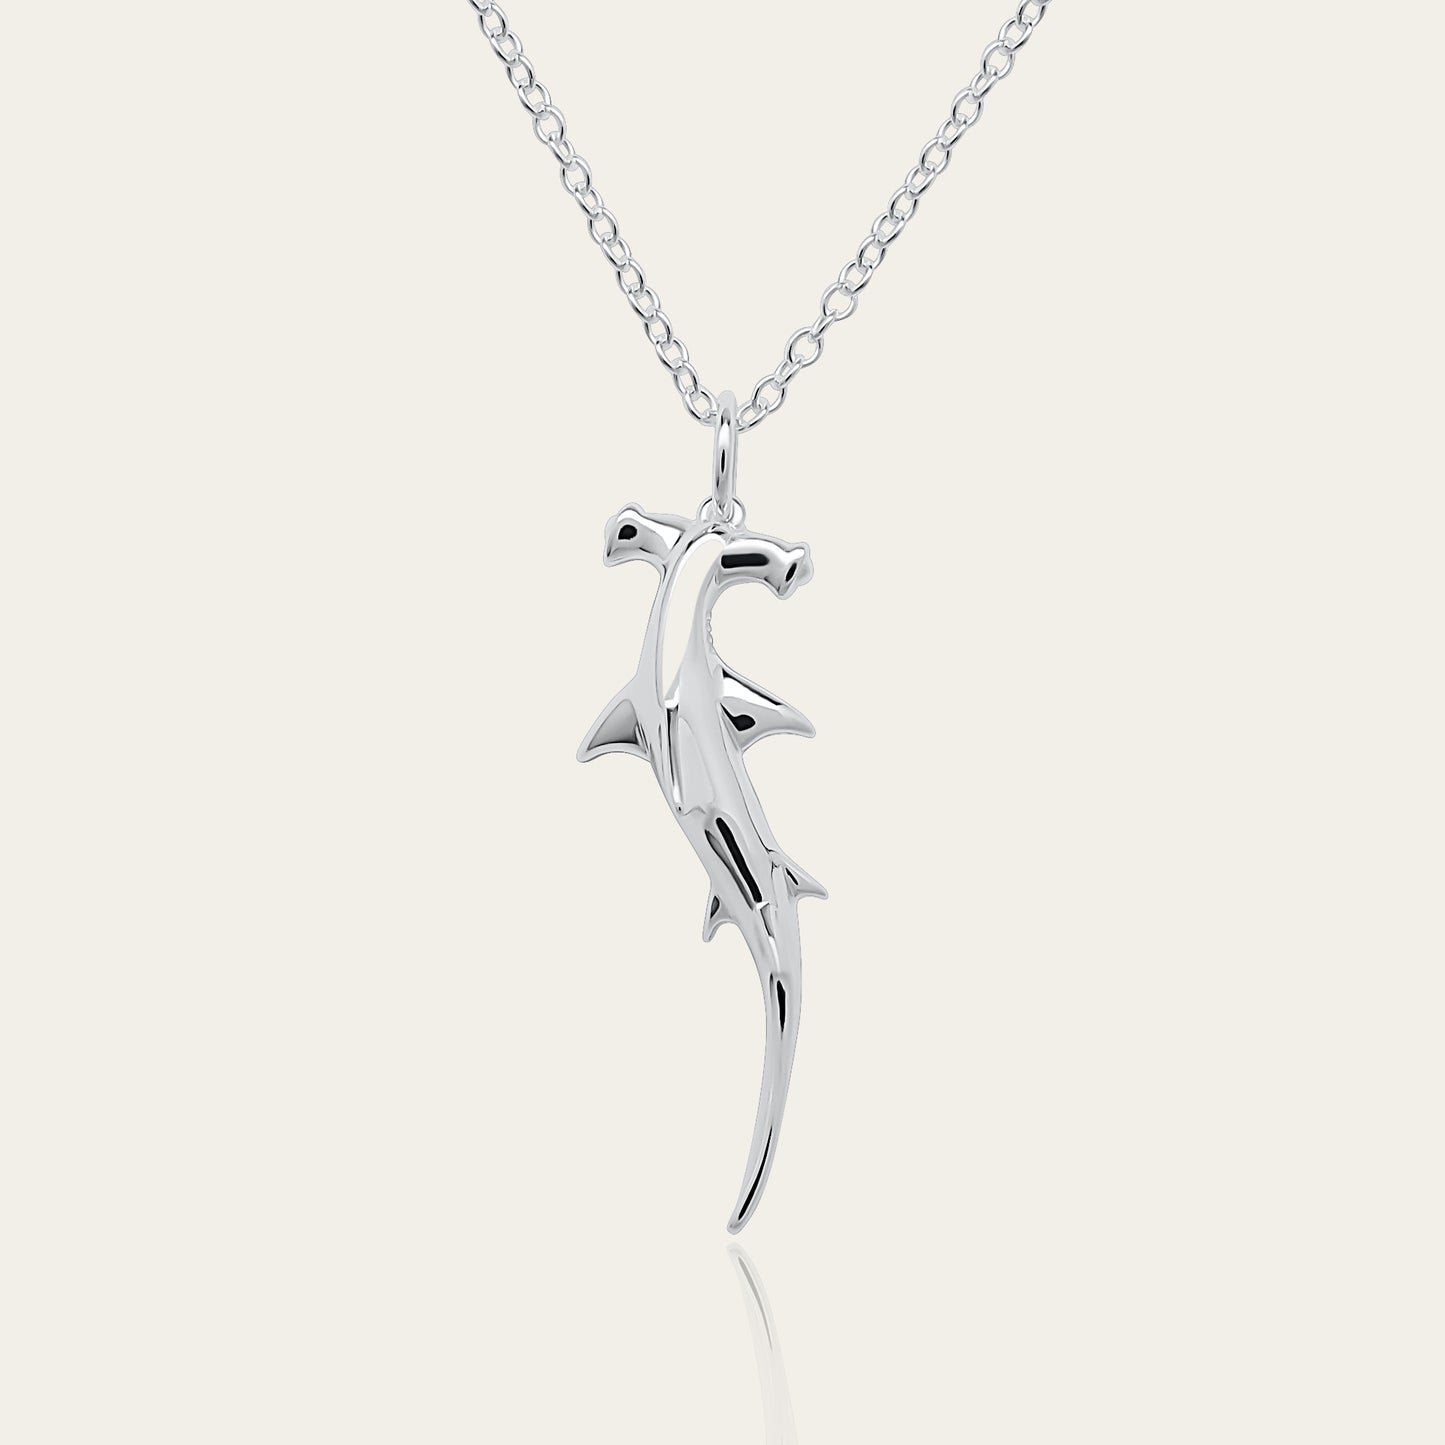 Hammerhead Shark necklace. Made from highly polished, tarnish resistant silver, hung on a solid silver chain. © Adrian Ashley